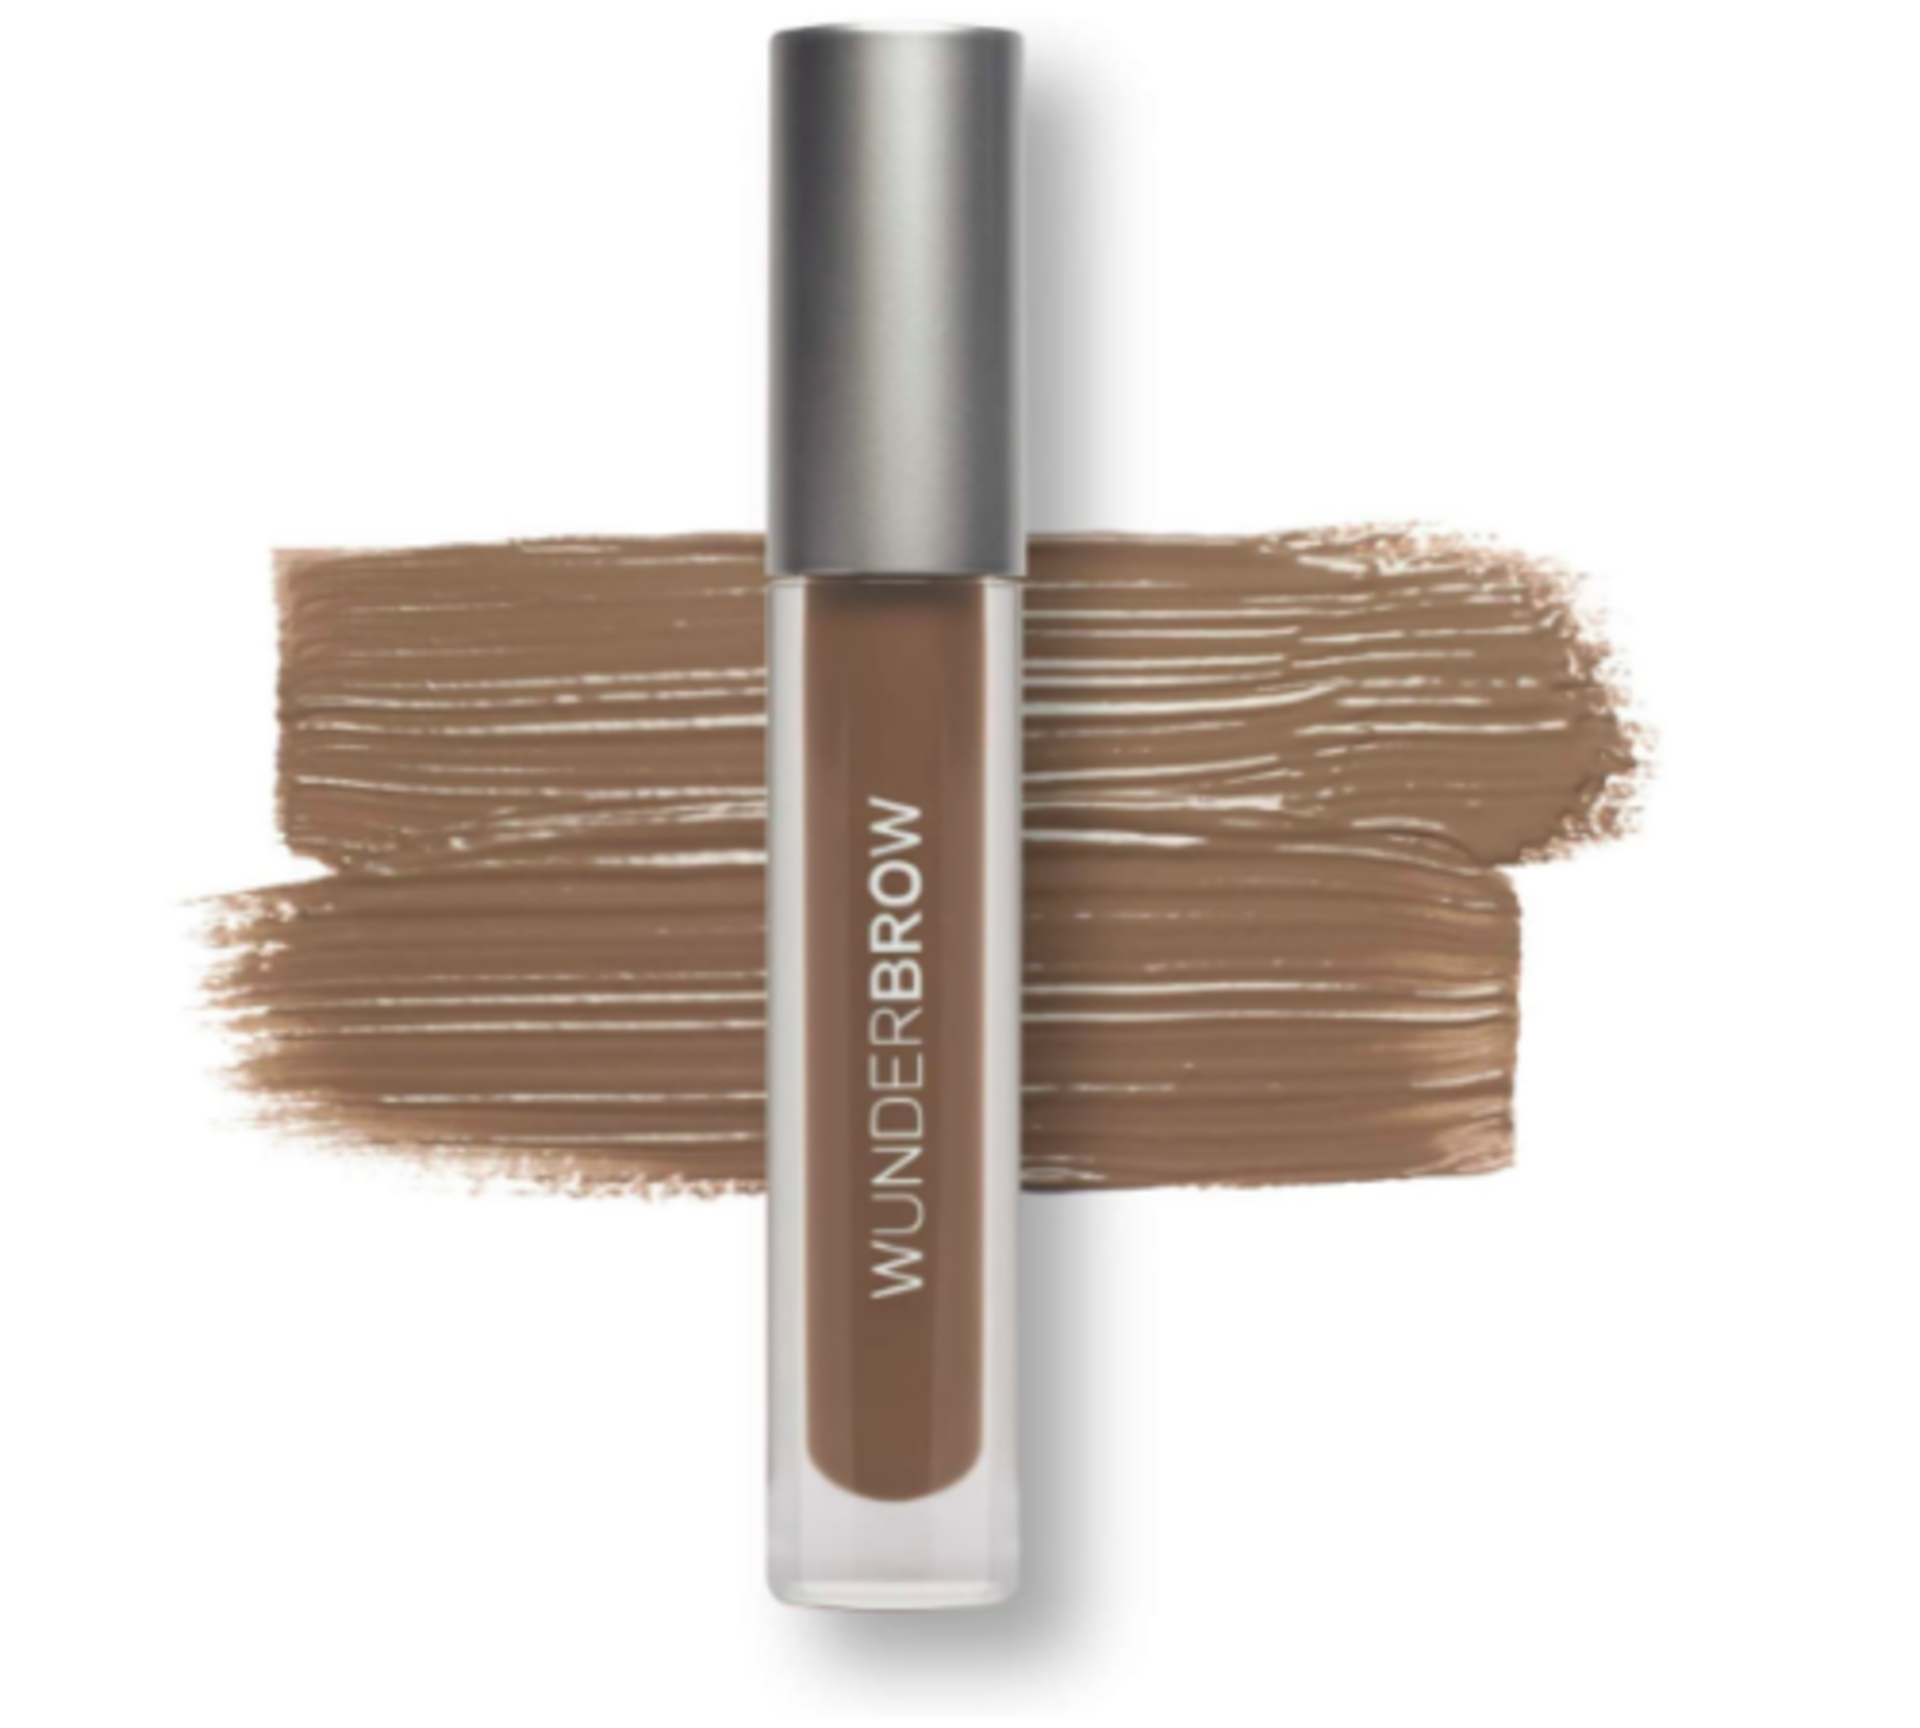 X2 BRAND NEW WUNDER BROW 1-STEP BROW GEL - WUNDER2 COMBINED RRP £44Condition ReportAppraisal